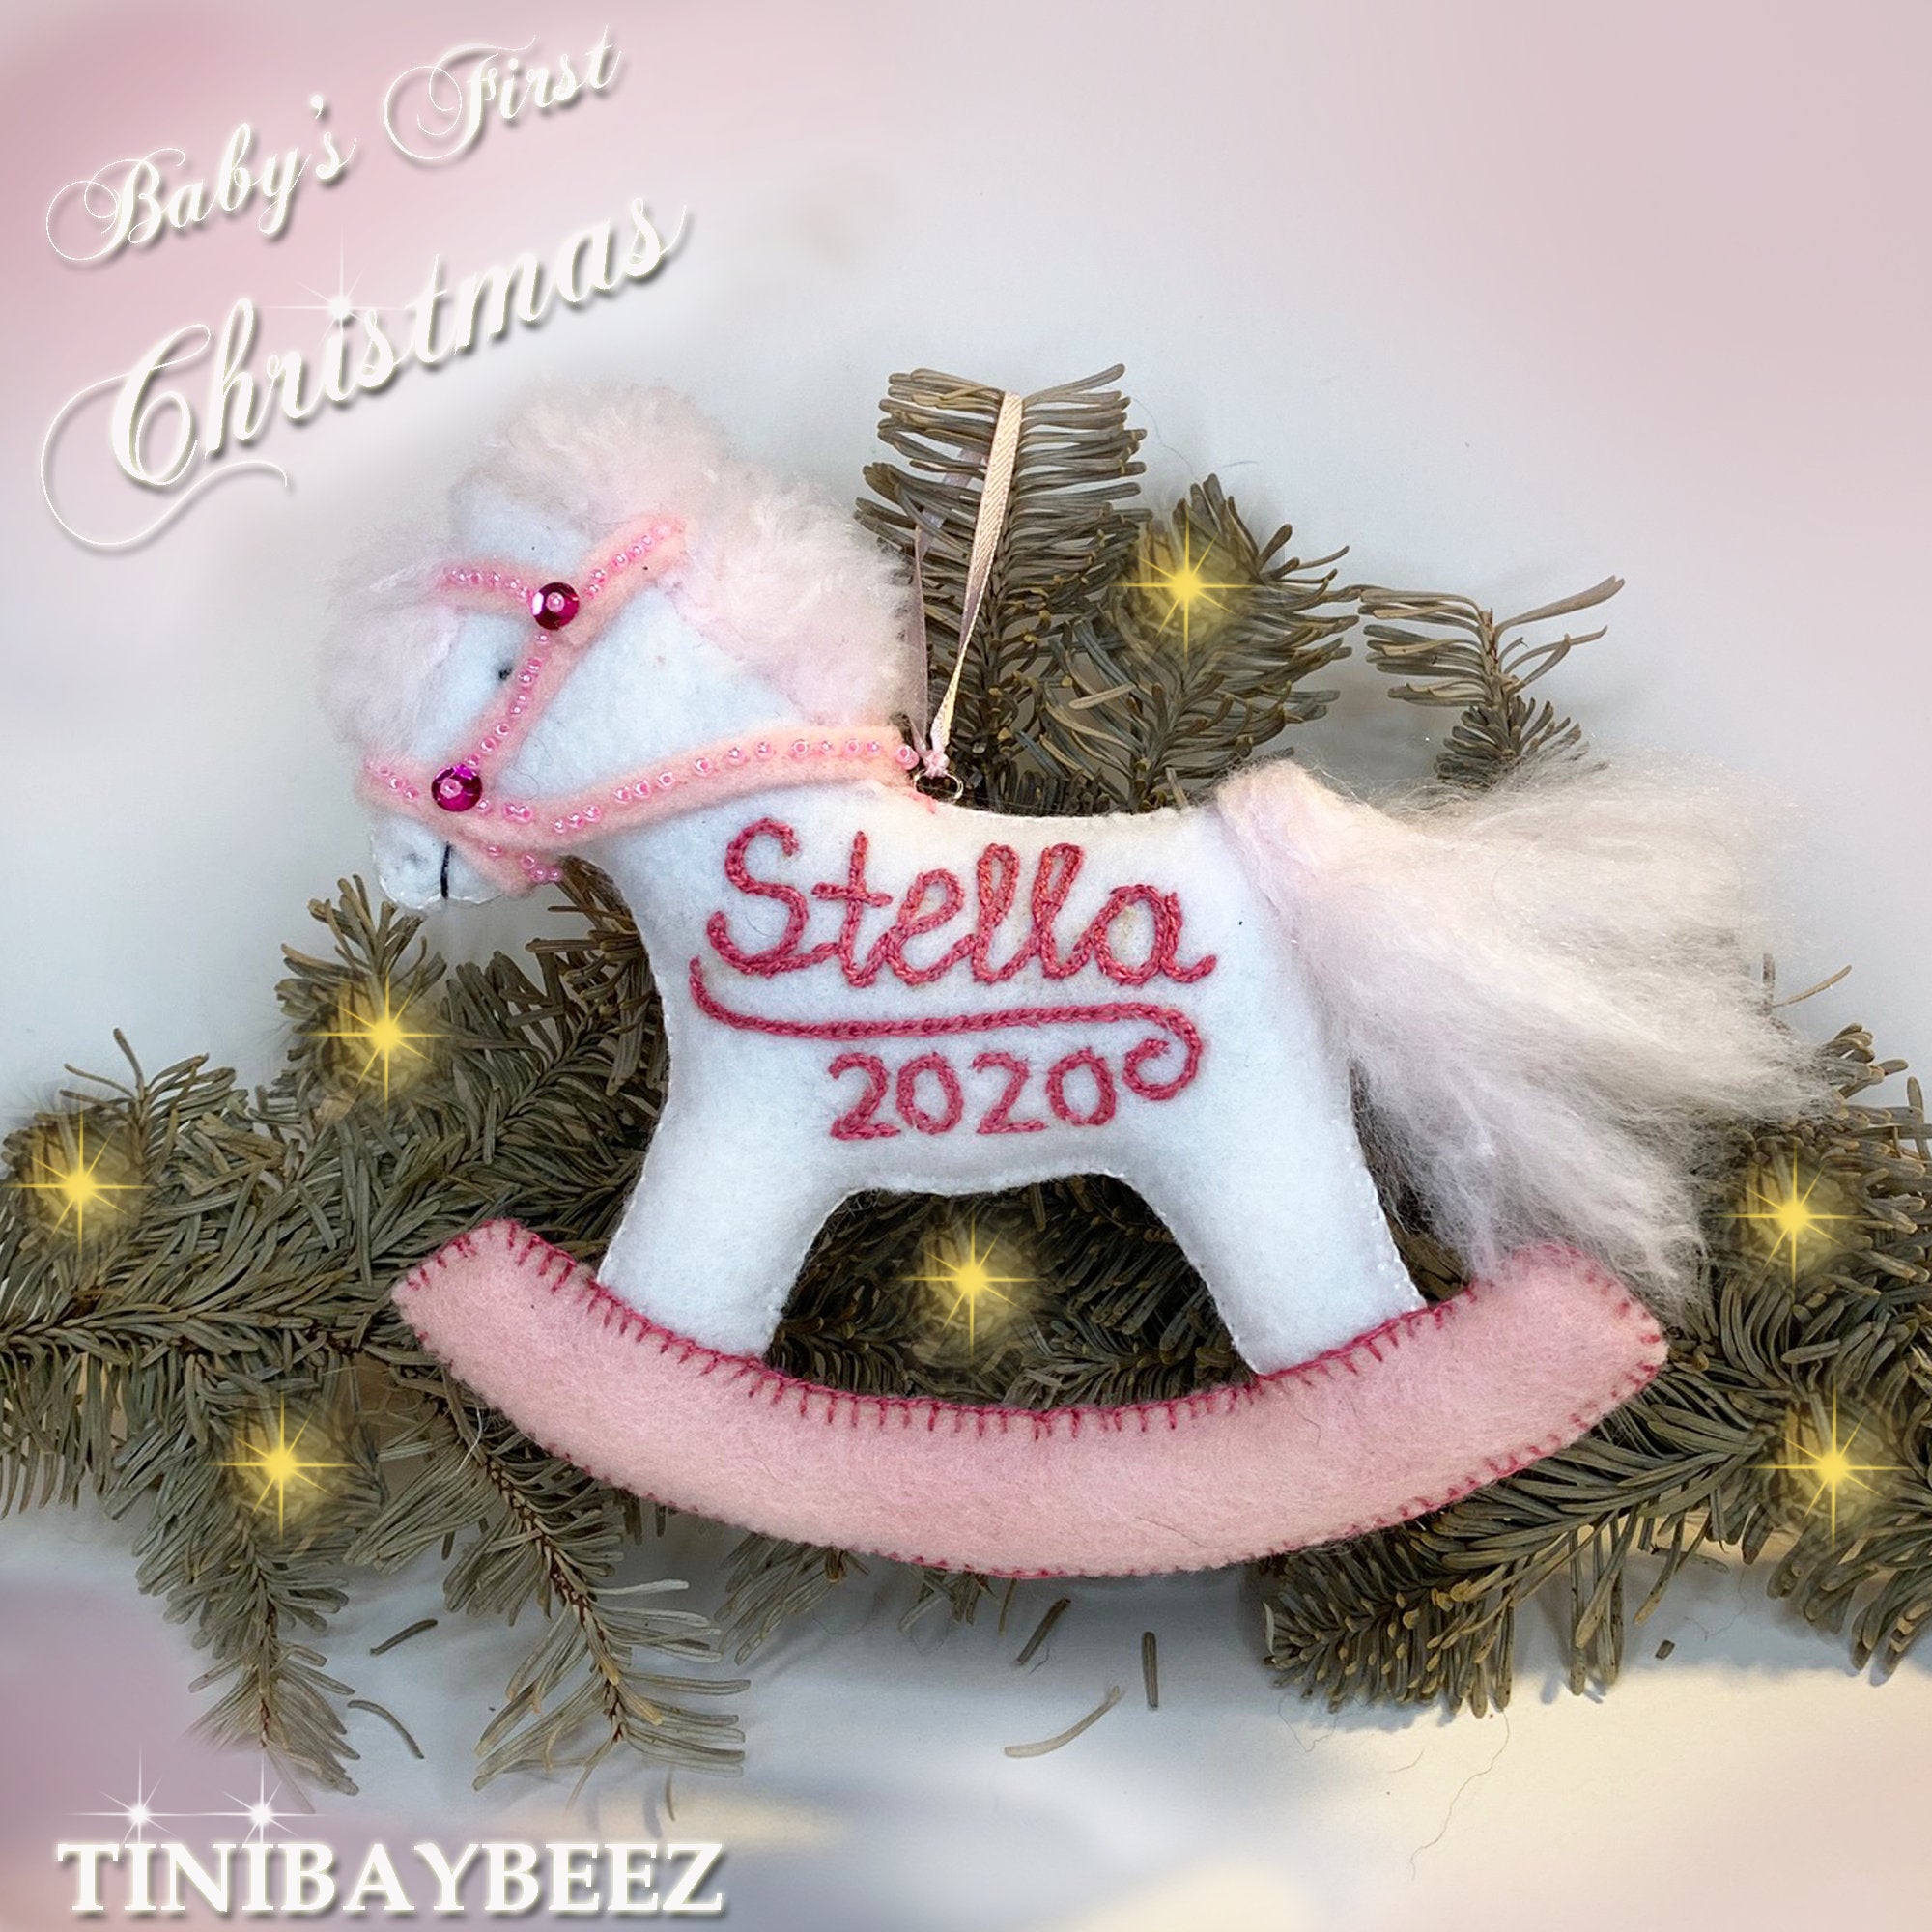 Limited Custom Baby's First Christmas Ornament-Personalized Rocking Horse Ornament-Embroidered Felt Ornament-Baby Shower Gift